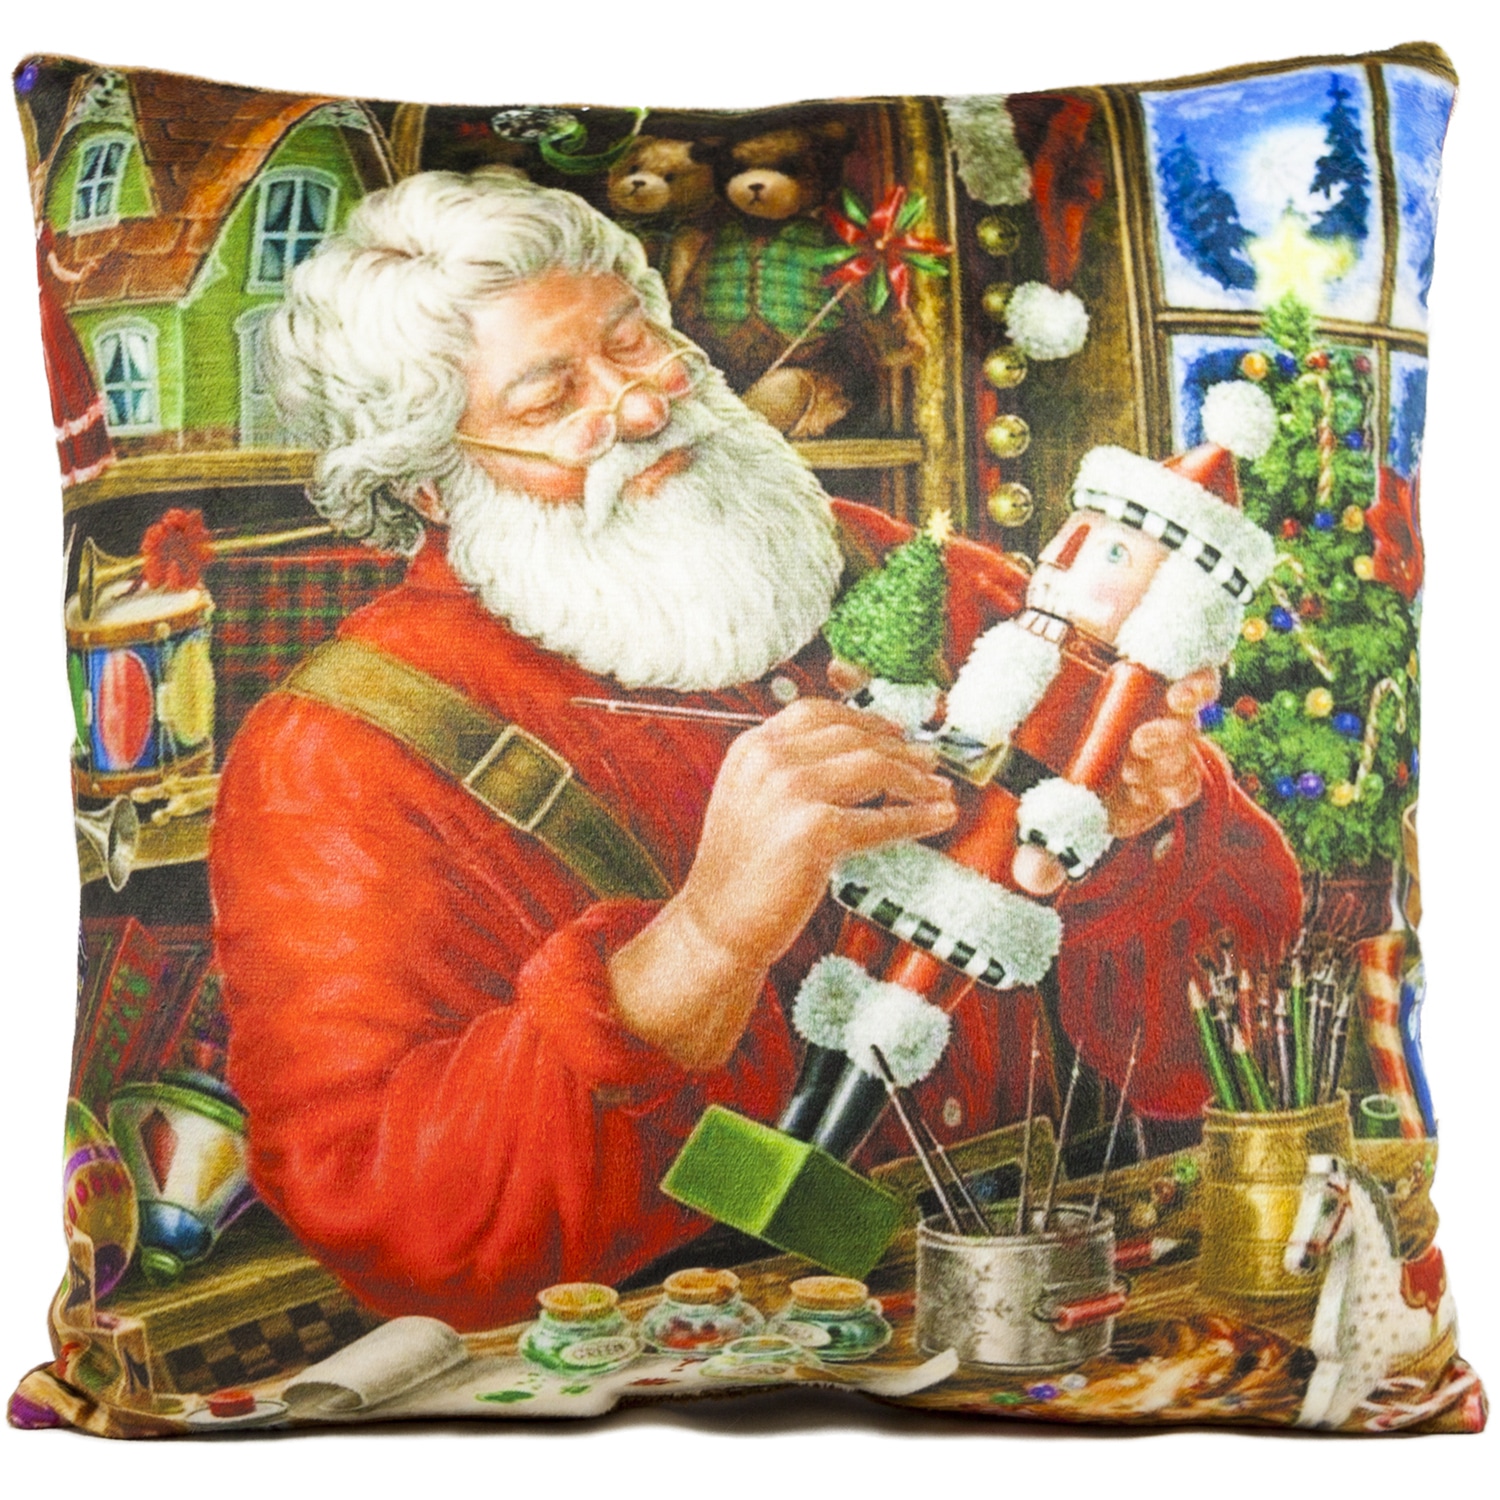 Christmas pillow - Santa Claus with a toy